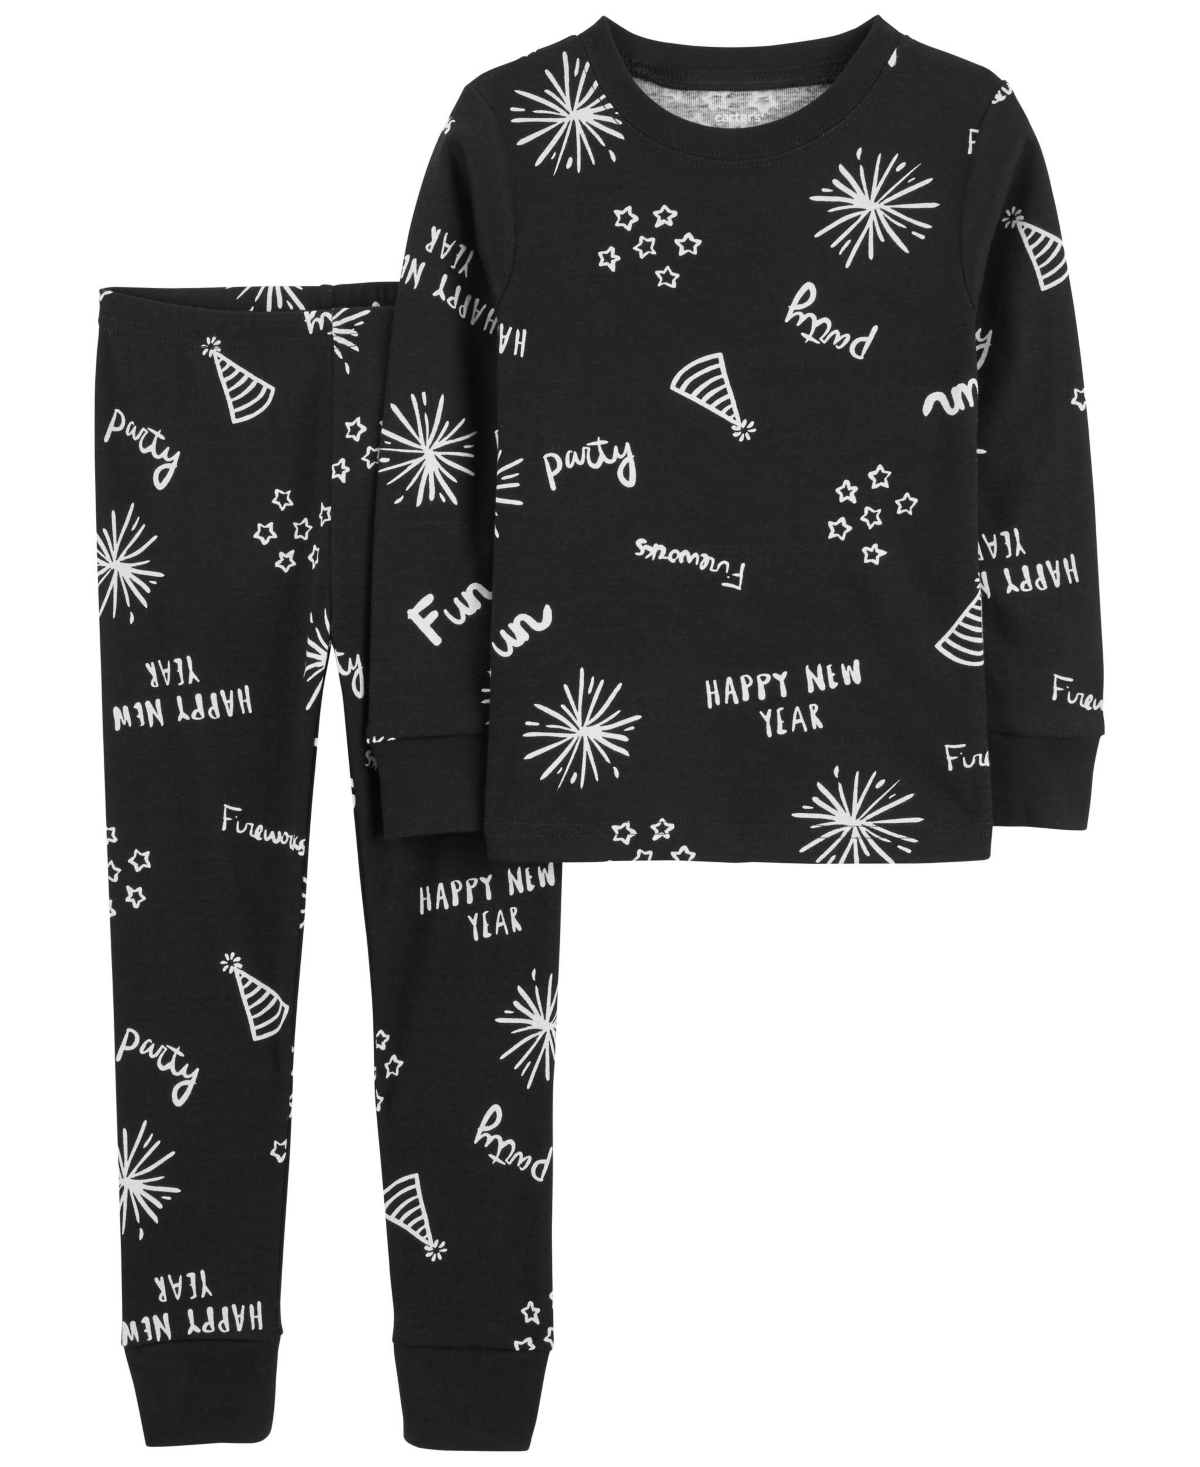 Carter's Babies' Toddler Boys And Toddler Girls Happy New Year 100% Snug Fit Cotton Pajamas, 2 Piece Set In Black